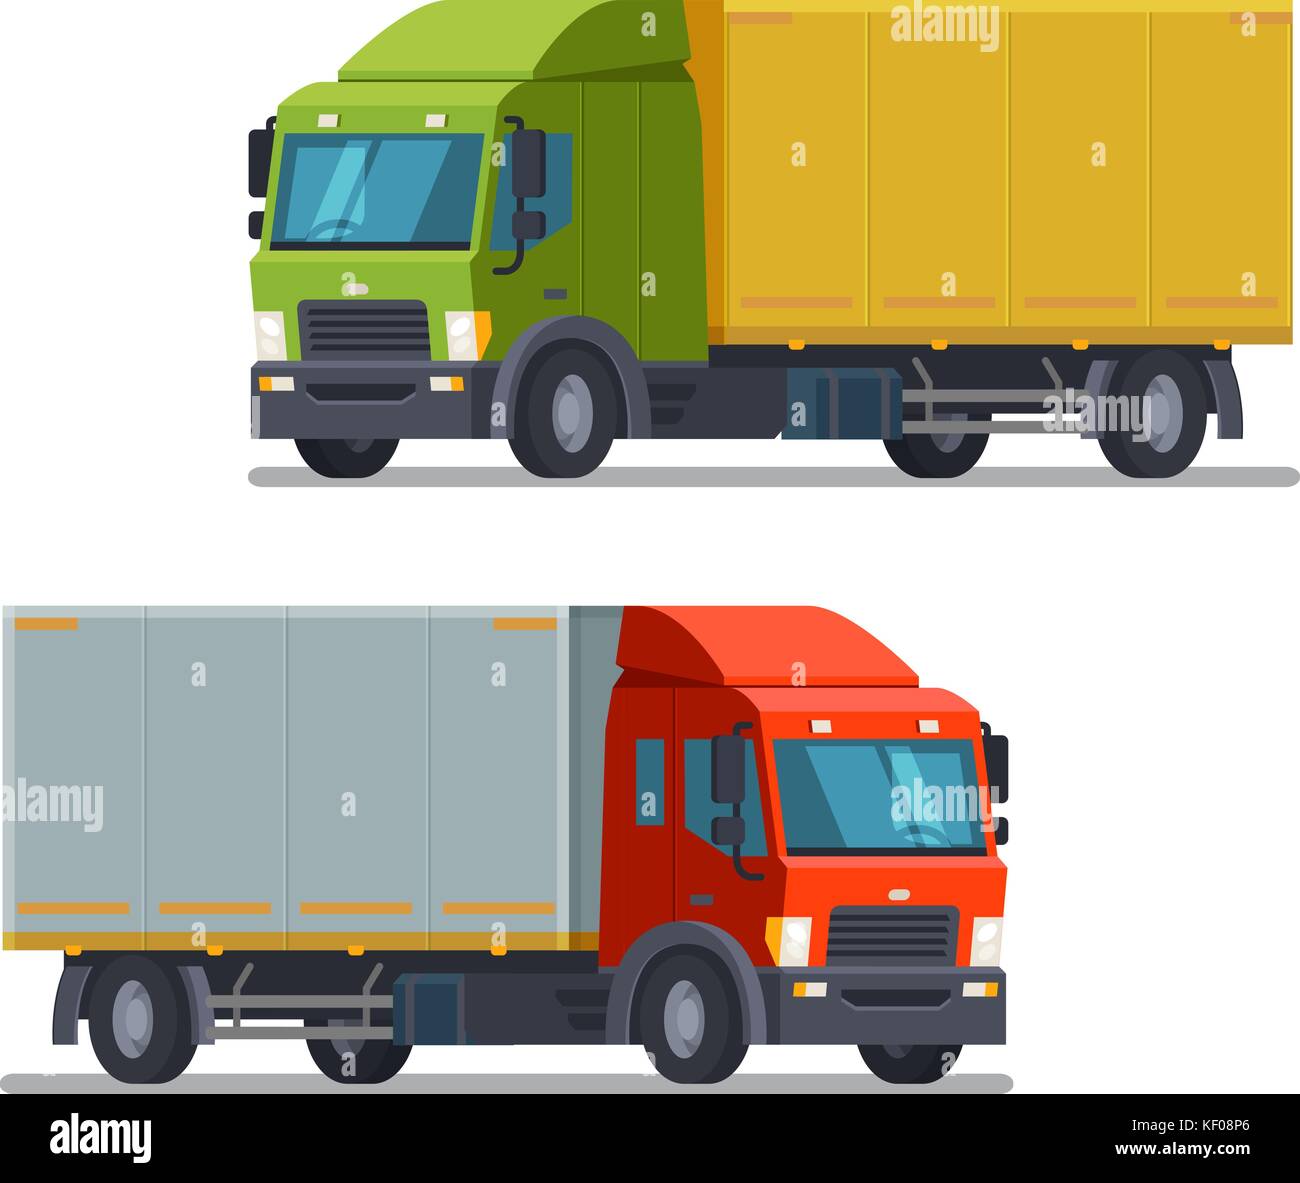 Truck, lorry icon or symbol. Delivery, logistics concept. Vector illustration Stock Vector